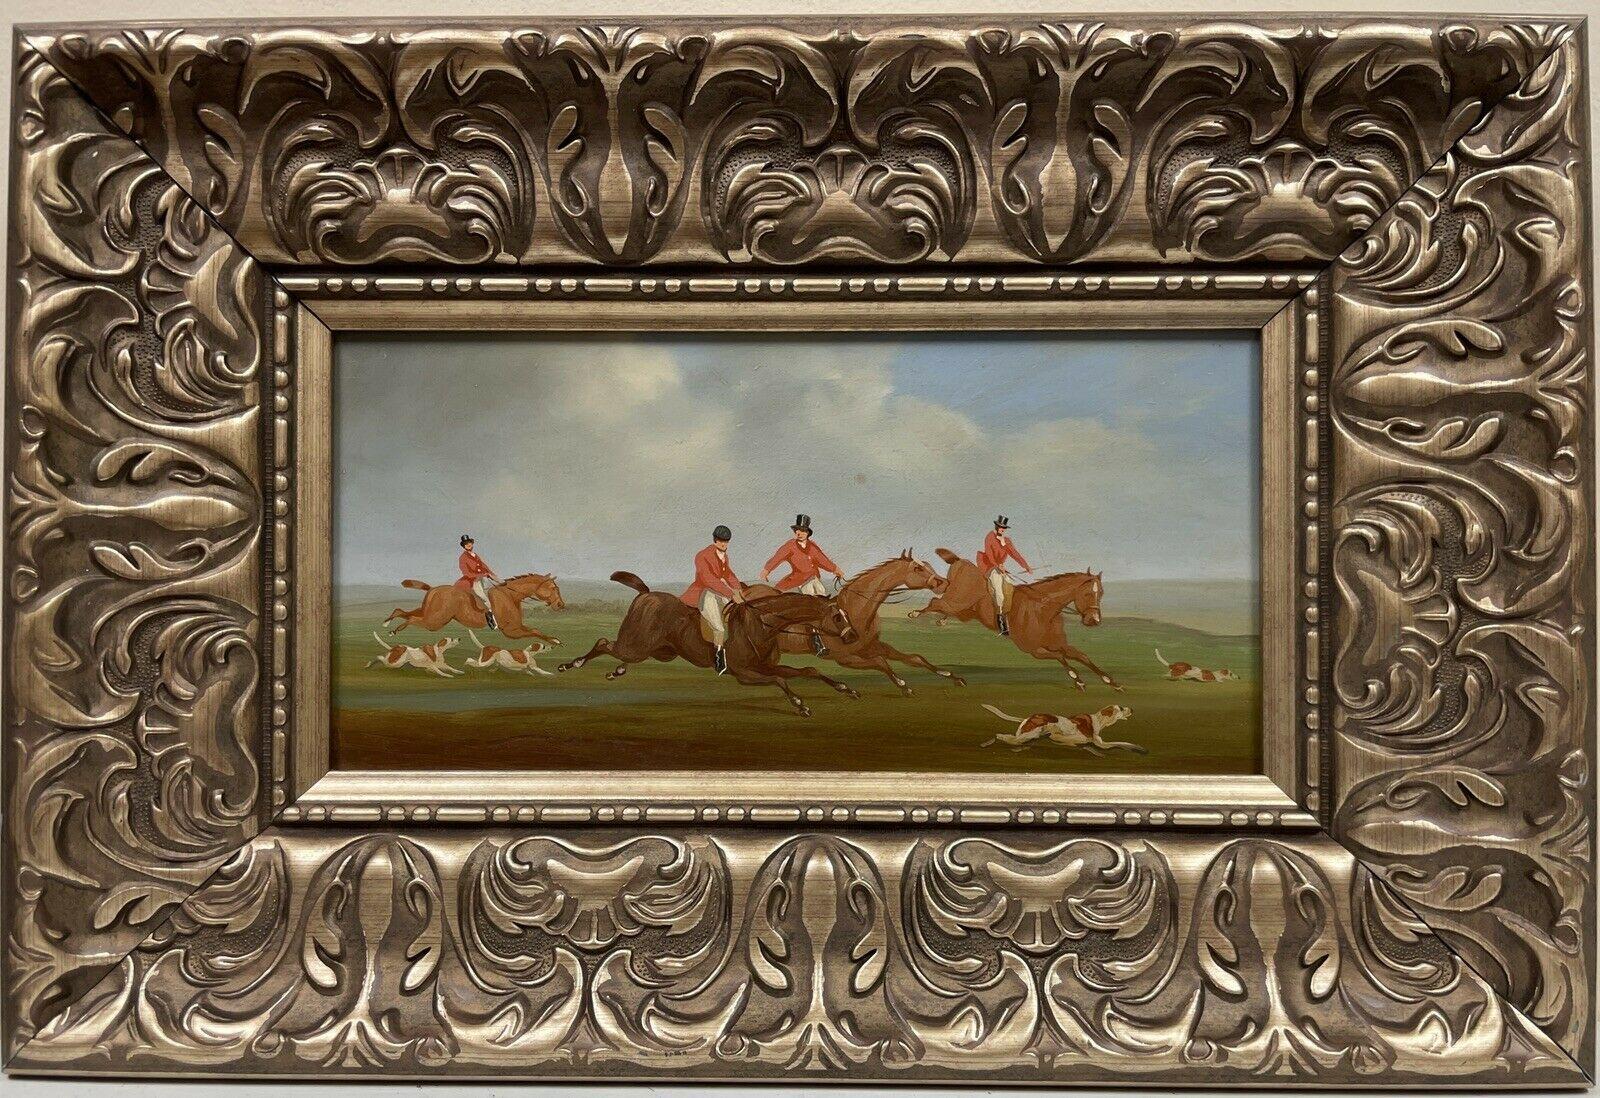 SET OF 4 ORIGINAL BRITISH OIL PAINTINGS - HUNTING SCENES - OILS ON PANEL FRAMED - Painting by William Rowland